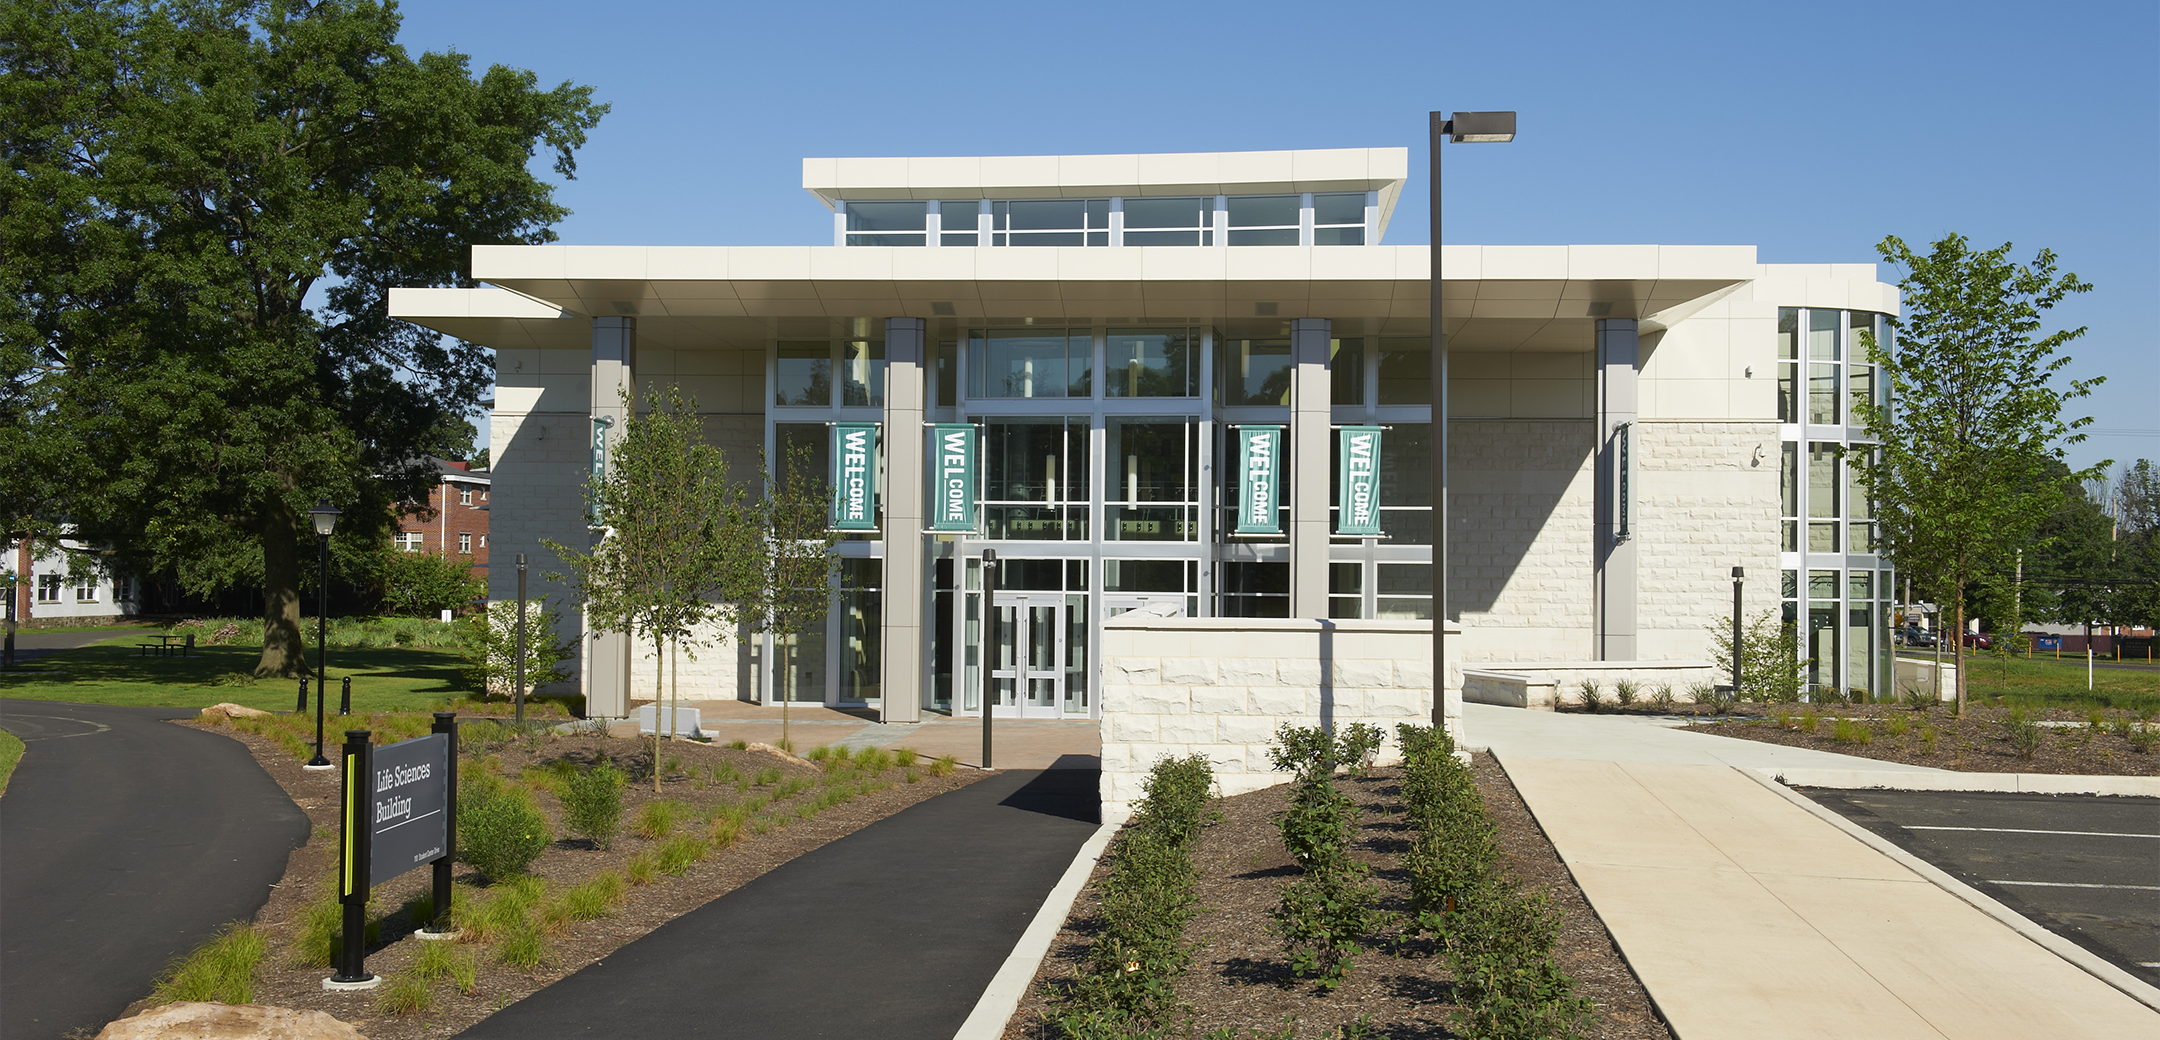 The front of the Delaware Valley College building showcasing the white brick and glass accent design with a front walkway and side parking lot.